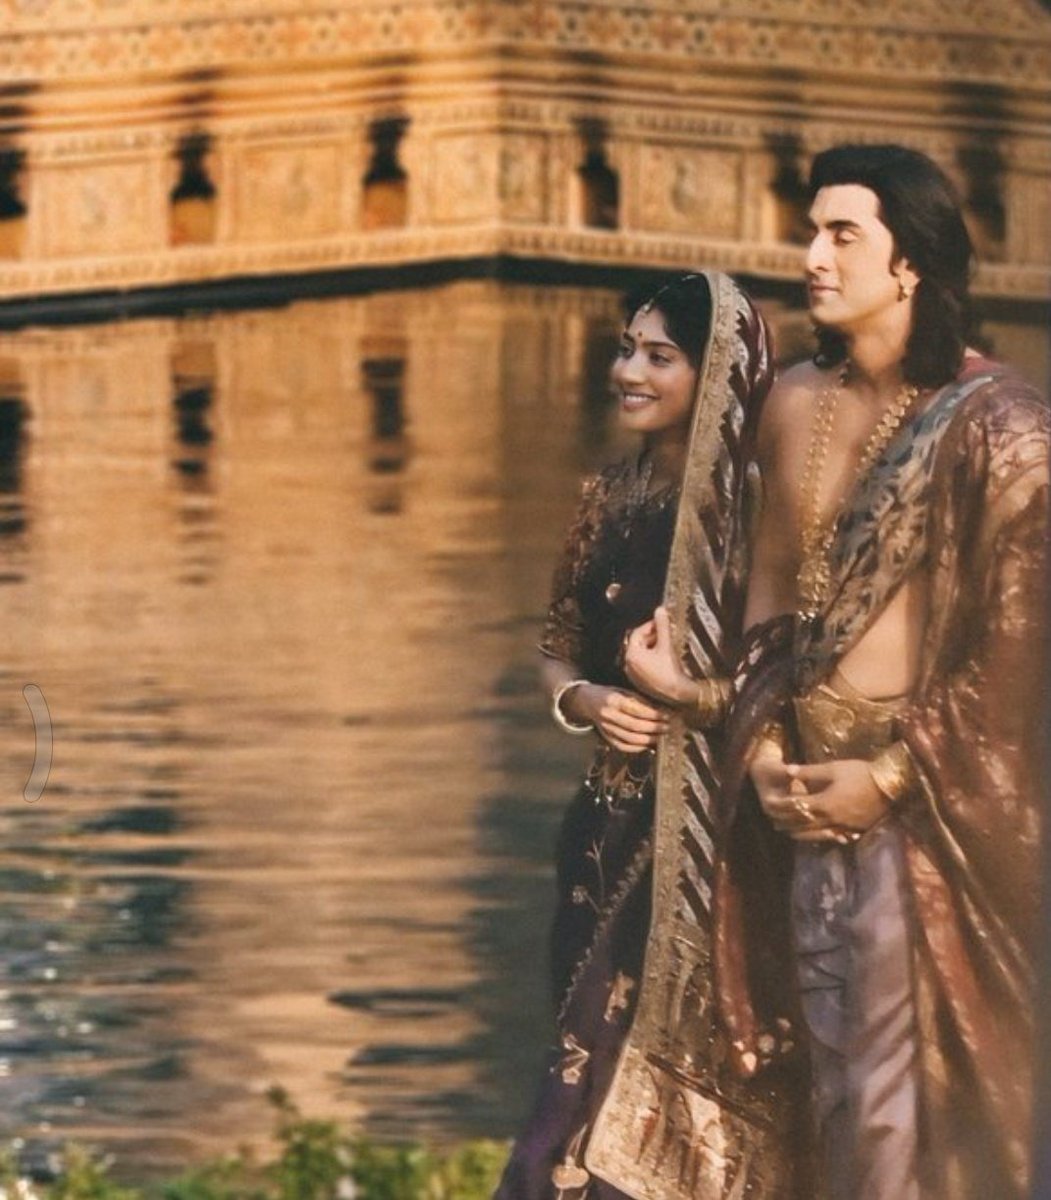 Ok then, I am sold. Leaked images from the set of #Ramayana #RanbirKapoor seems to have got the 'saumyata' of Lord Rama on point. And #SaiPallavi looks divine as #Sita. The look is good. Now let's see if #NiteshTiwari can deliver the final product... Pics: @ZoomTV